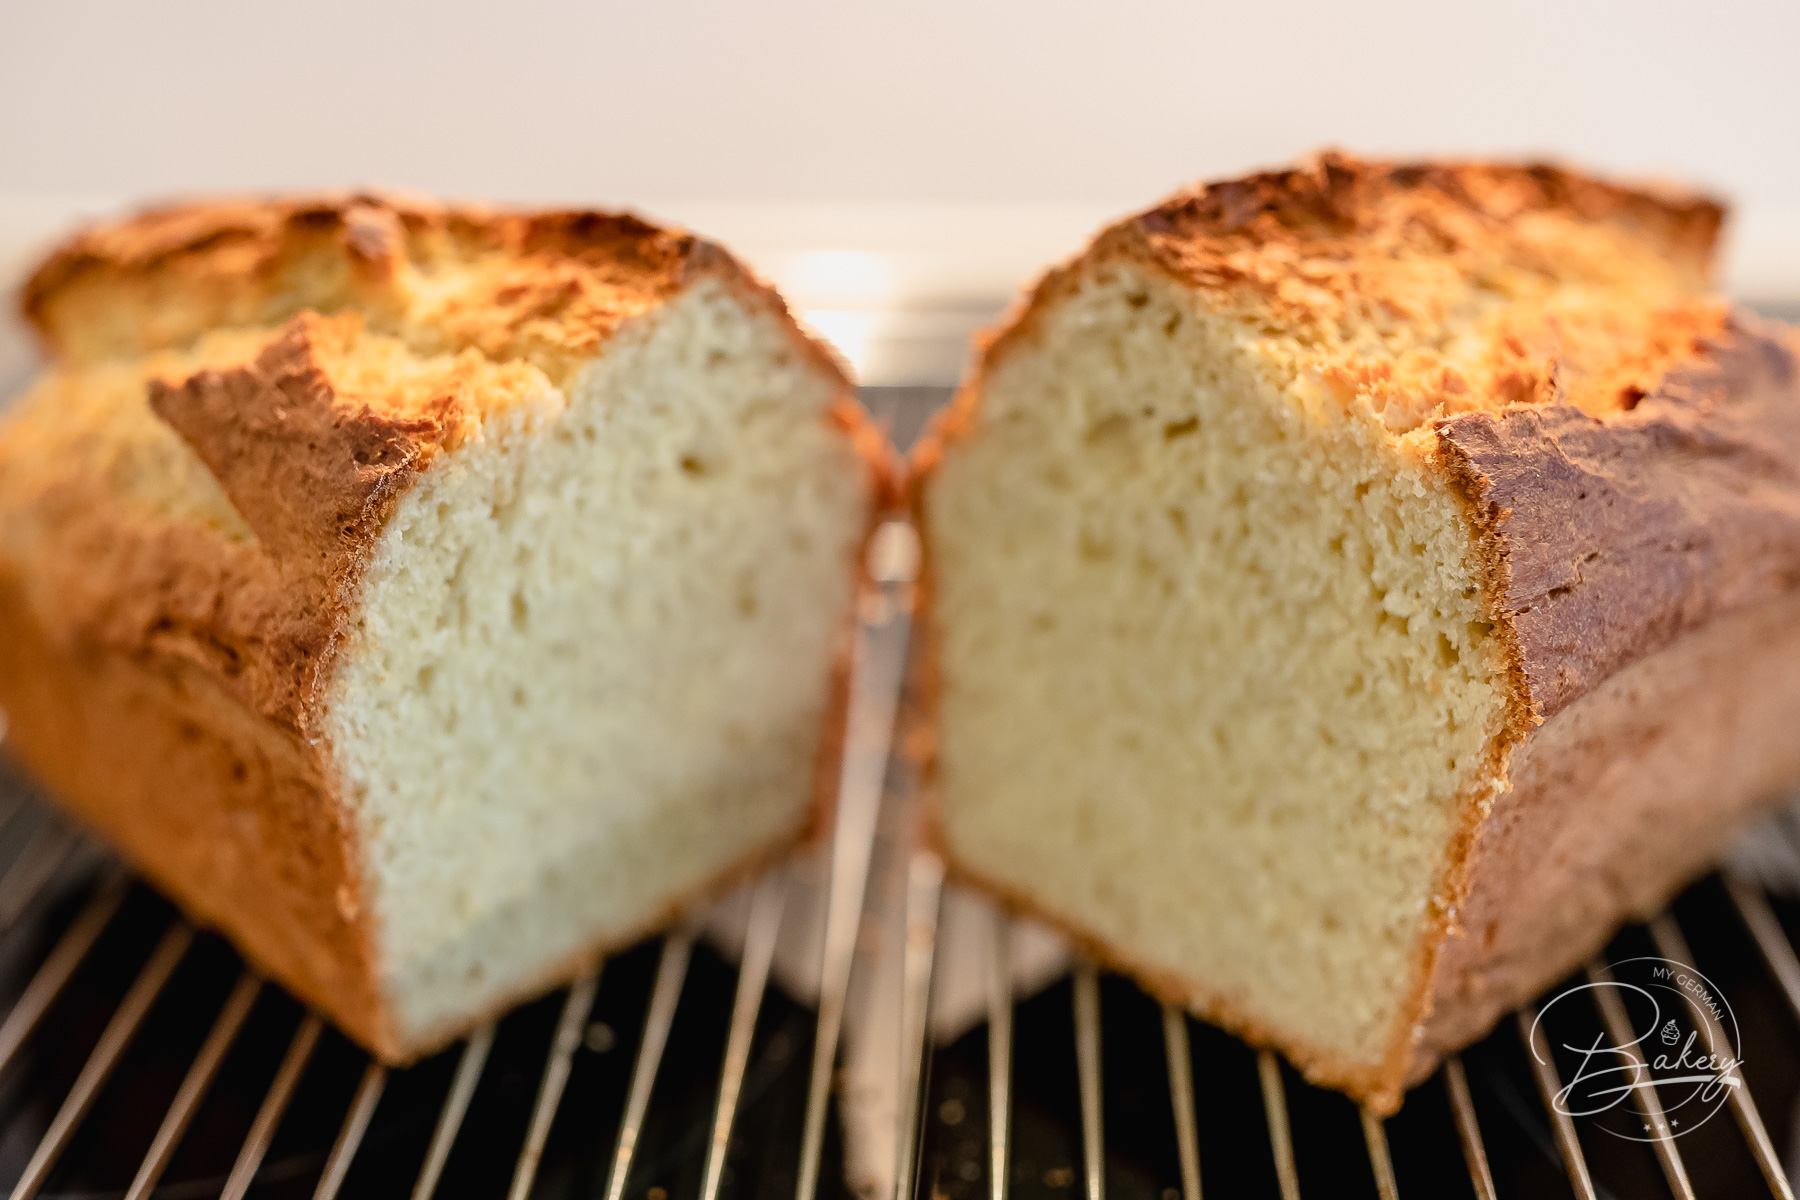 Simple sweet Brioche - bread recipe - Delicious bread quickly homemade - always succeeds - as at the bakery - freshly baked yourself - Sunday breakfast - Brioche and sweet white bread - recipe for simple sweet Brioche as bread recipe. Delicious sweet bread baked quickly. Ingredients: Flour, sugar, milk, eggs, yeast, butter.